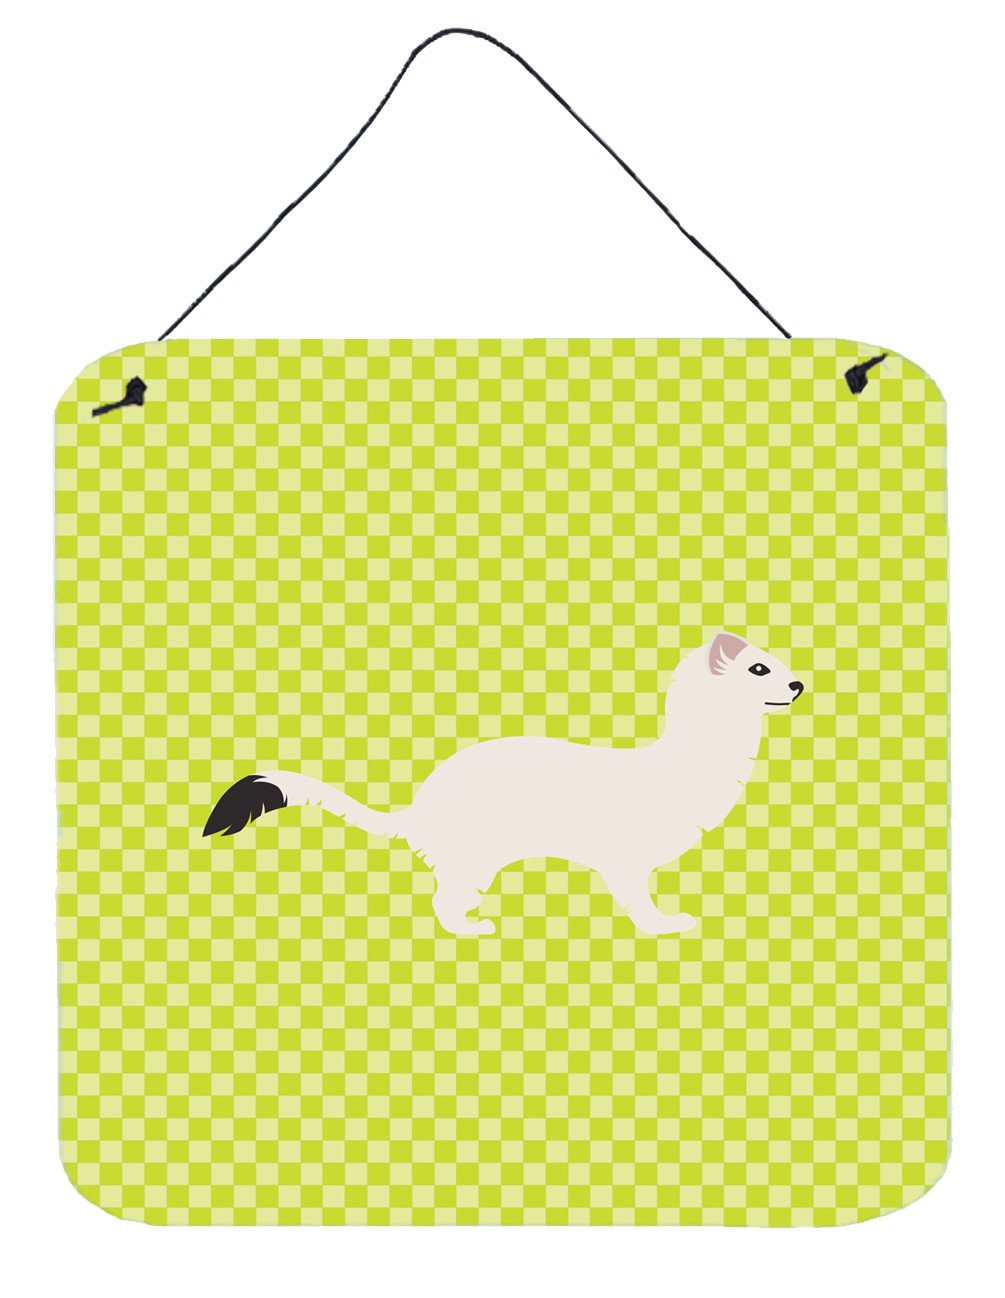 Stoat Short-tailed Weasel Green Wall or Door Hanging Prints BB7698DS66 by Caroline's Treasures